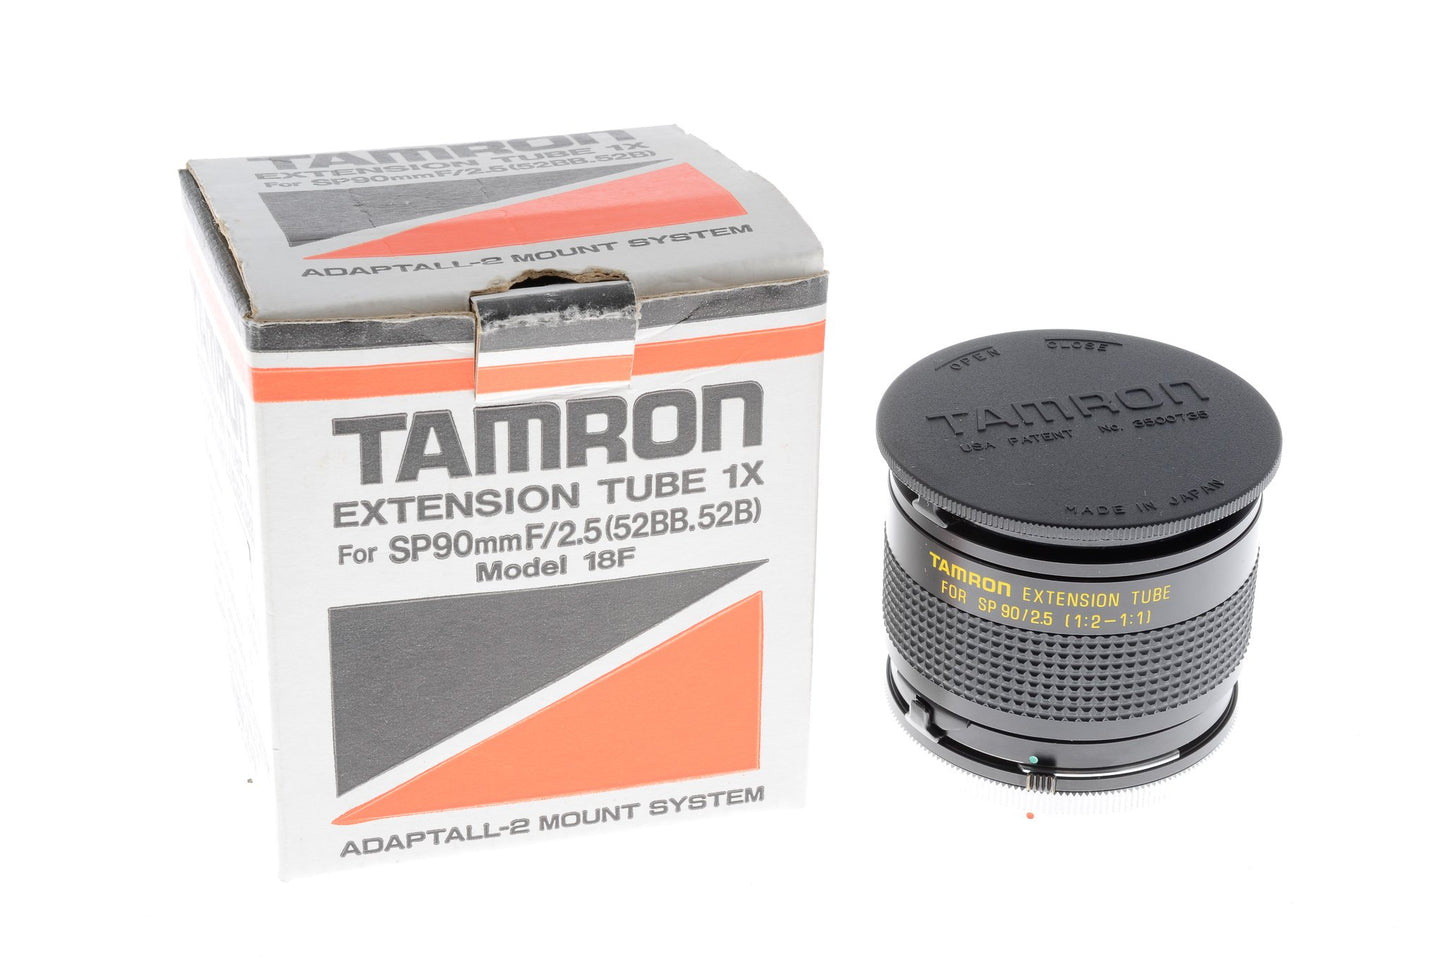 Tamron Extension Tube for SP 90mm f2.5 (1:2–1:1) 18F - Accessory